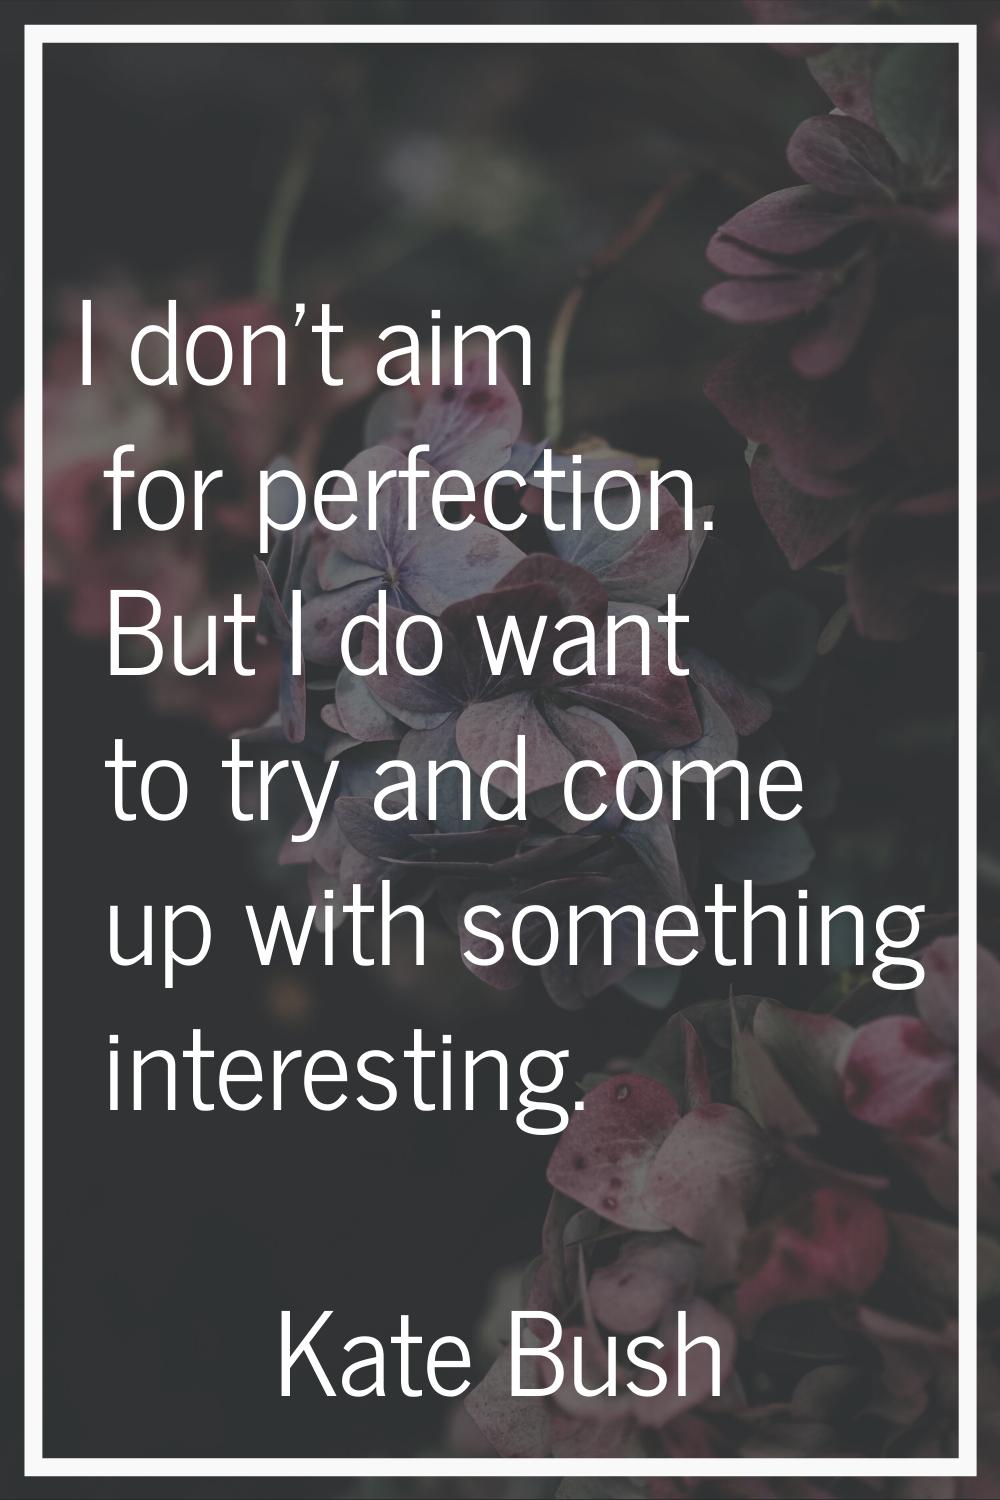 I don't aim for perfection. But I do want to try and come up with something interesting.